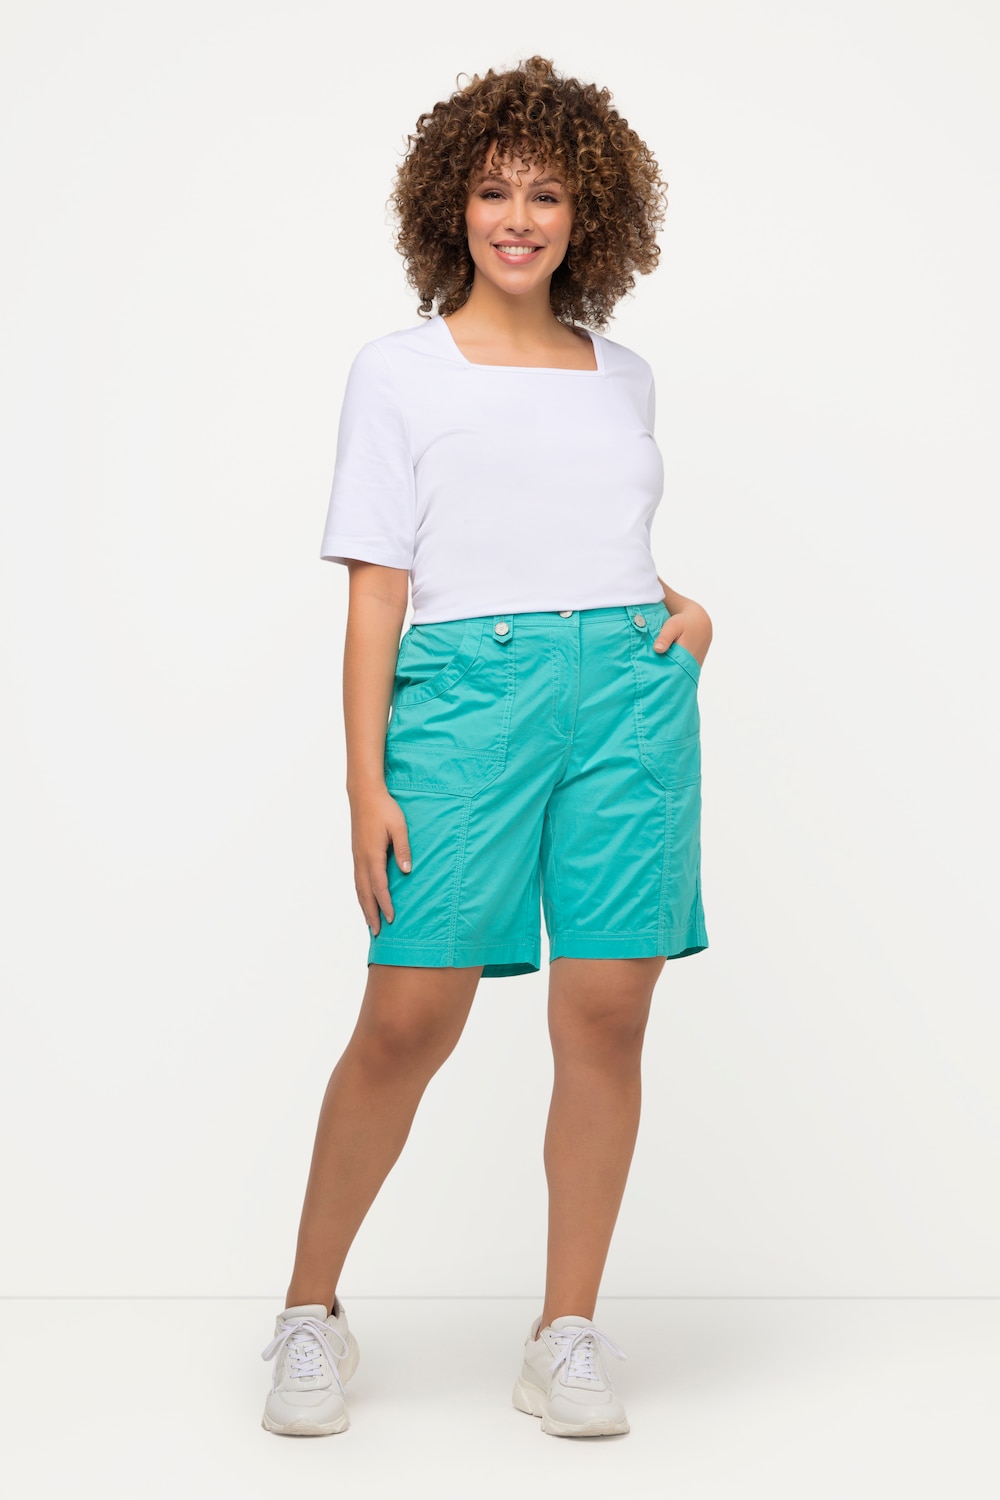 grandes tailles bermuda style cargo 4 poches, femmes, turquoise, taille: 56, coton, ulla popken